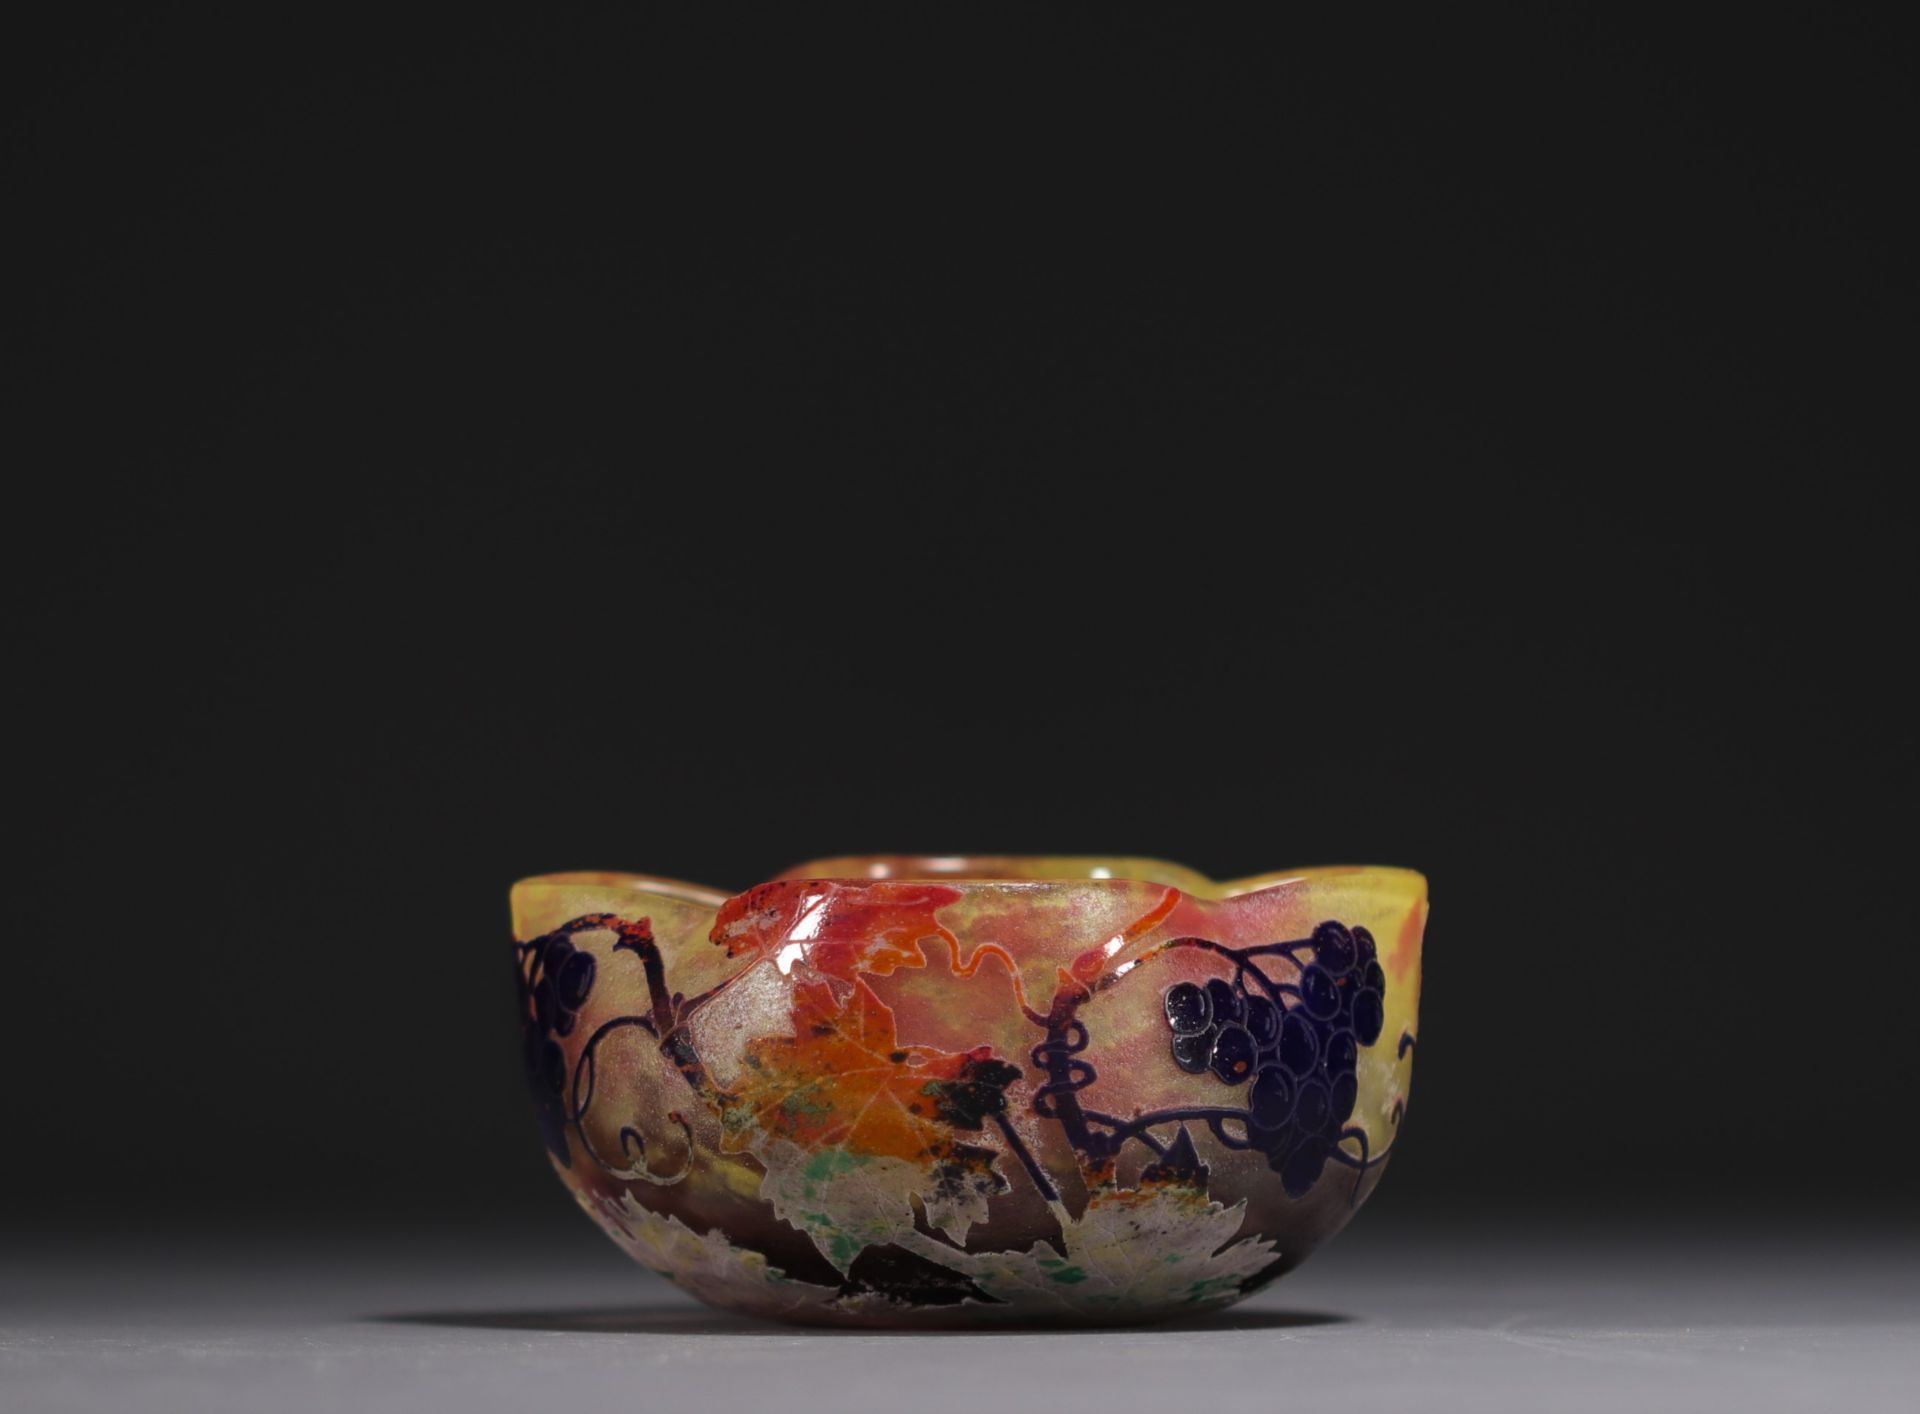 DAUM Nancy - Four-lobed bowl in acid-etched multi-layered glass decorated with bunches of grapes, si